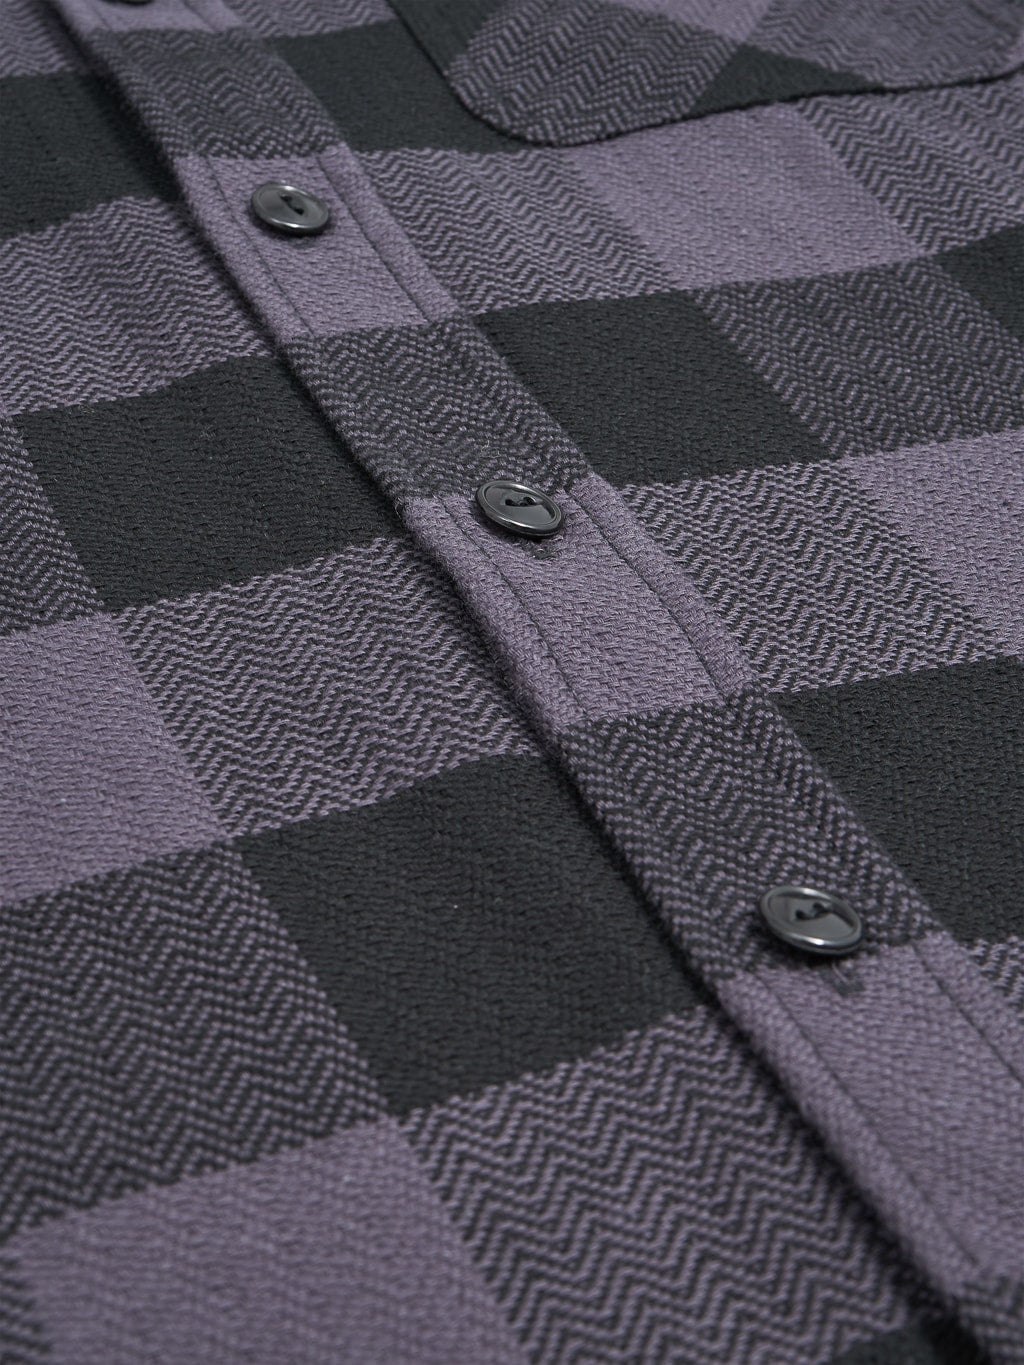 The Flat Head Block Check Flannel Shirt Grey buttons